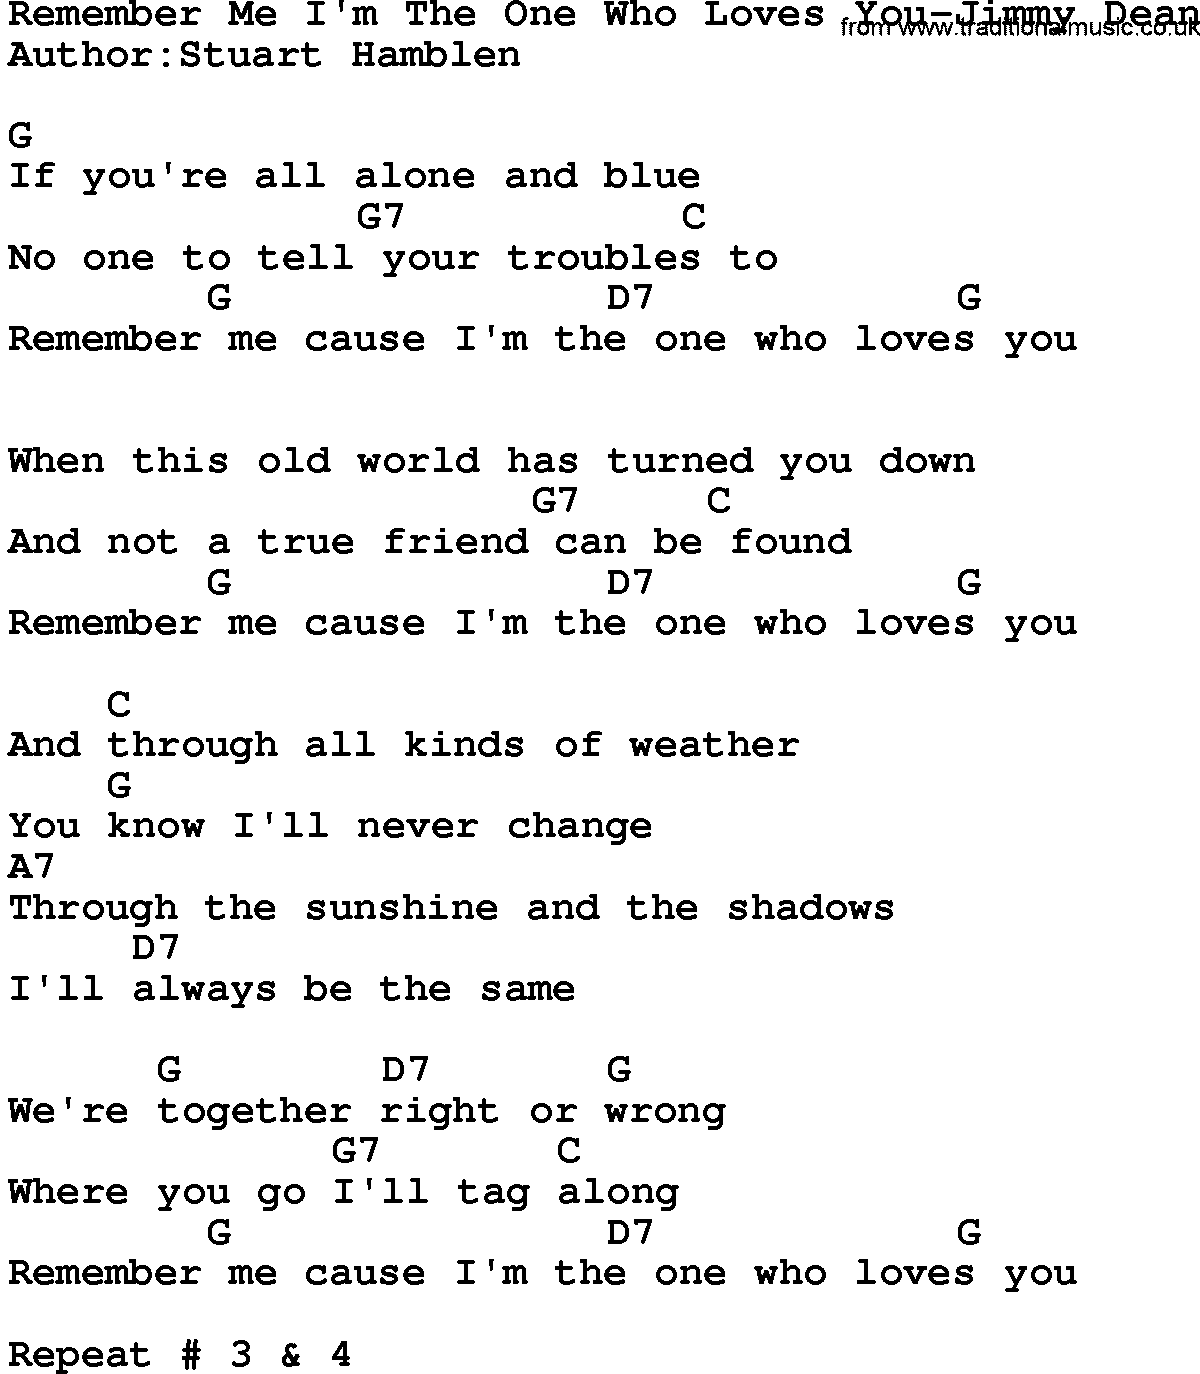 Country music song: Remember Me I'm The One Who Loves You-Jimmy Dean lyrics and chords